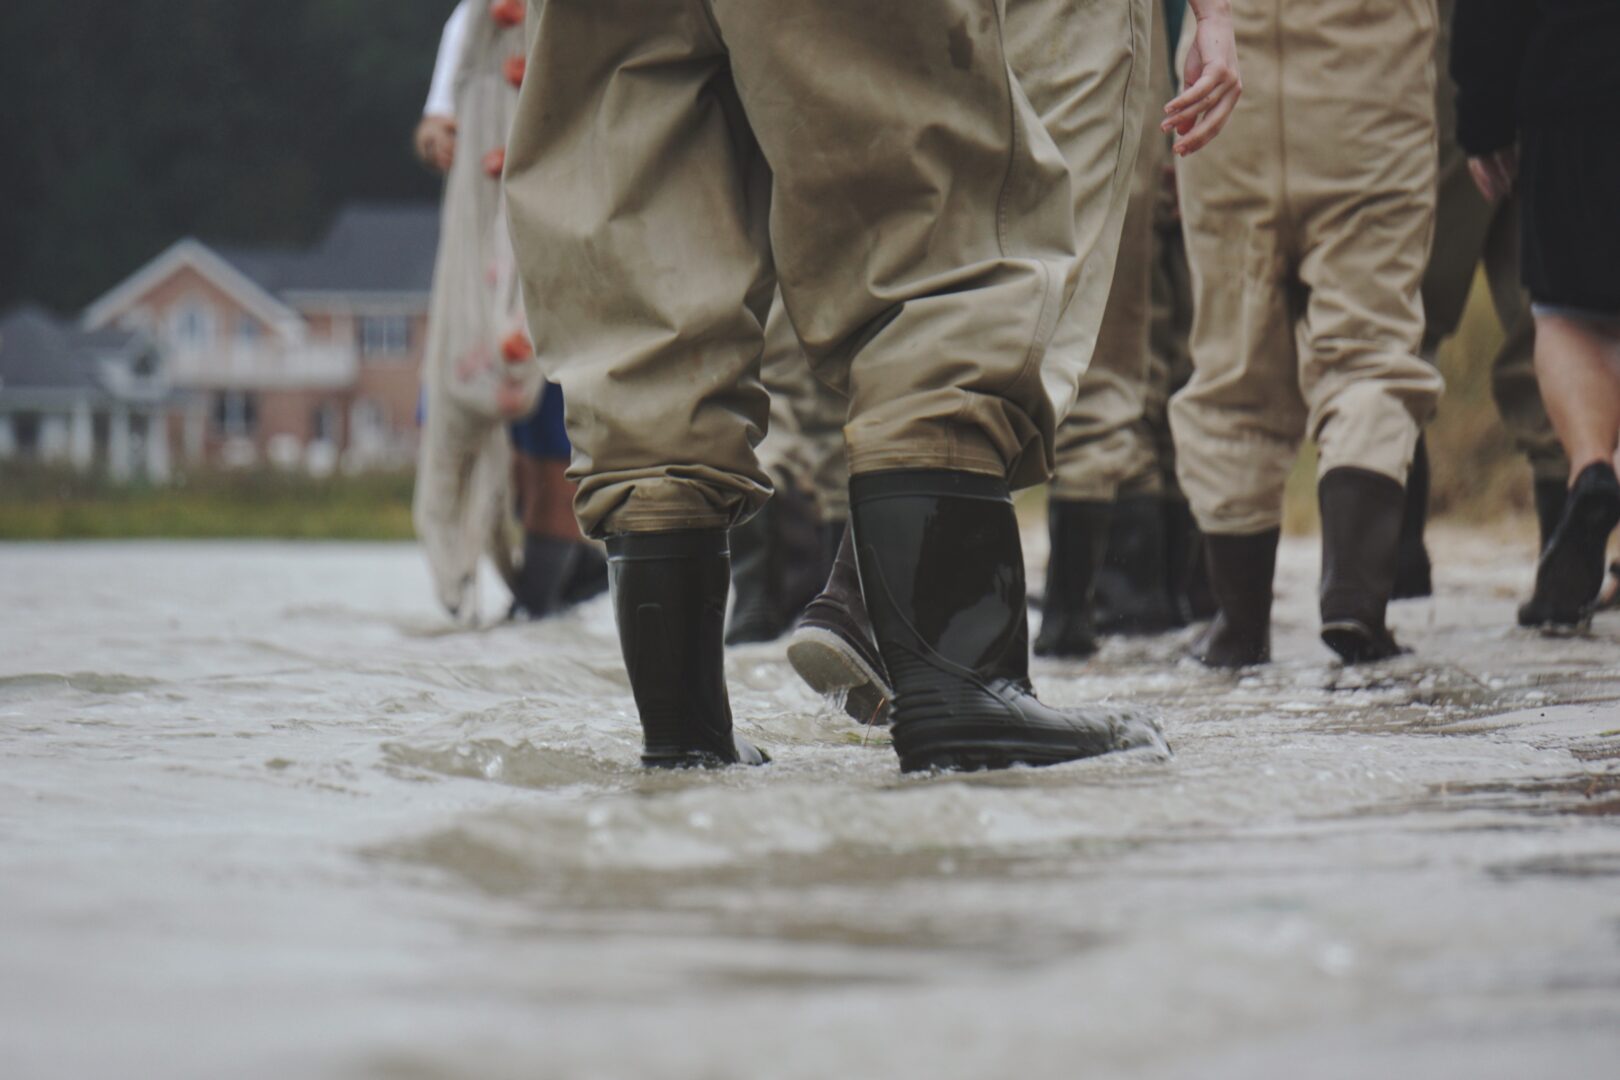 A close up of some people in waders walking through water